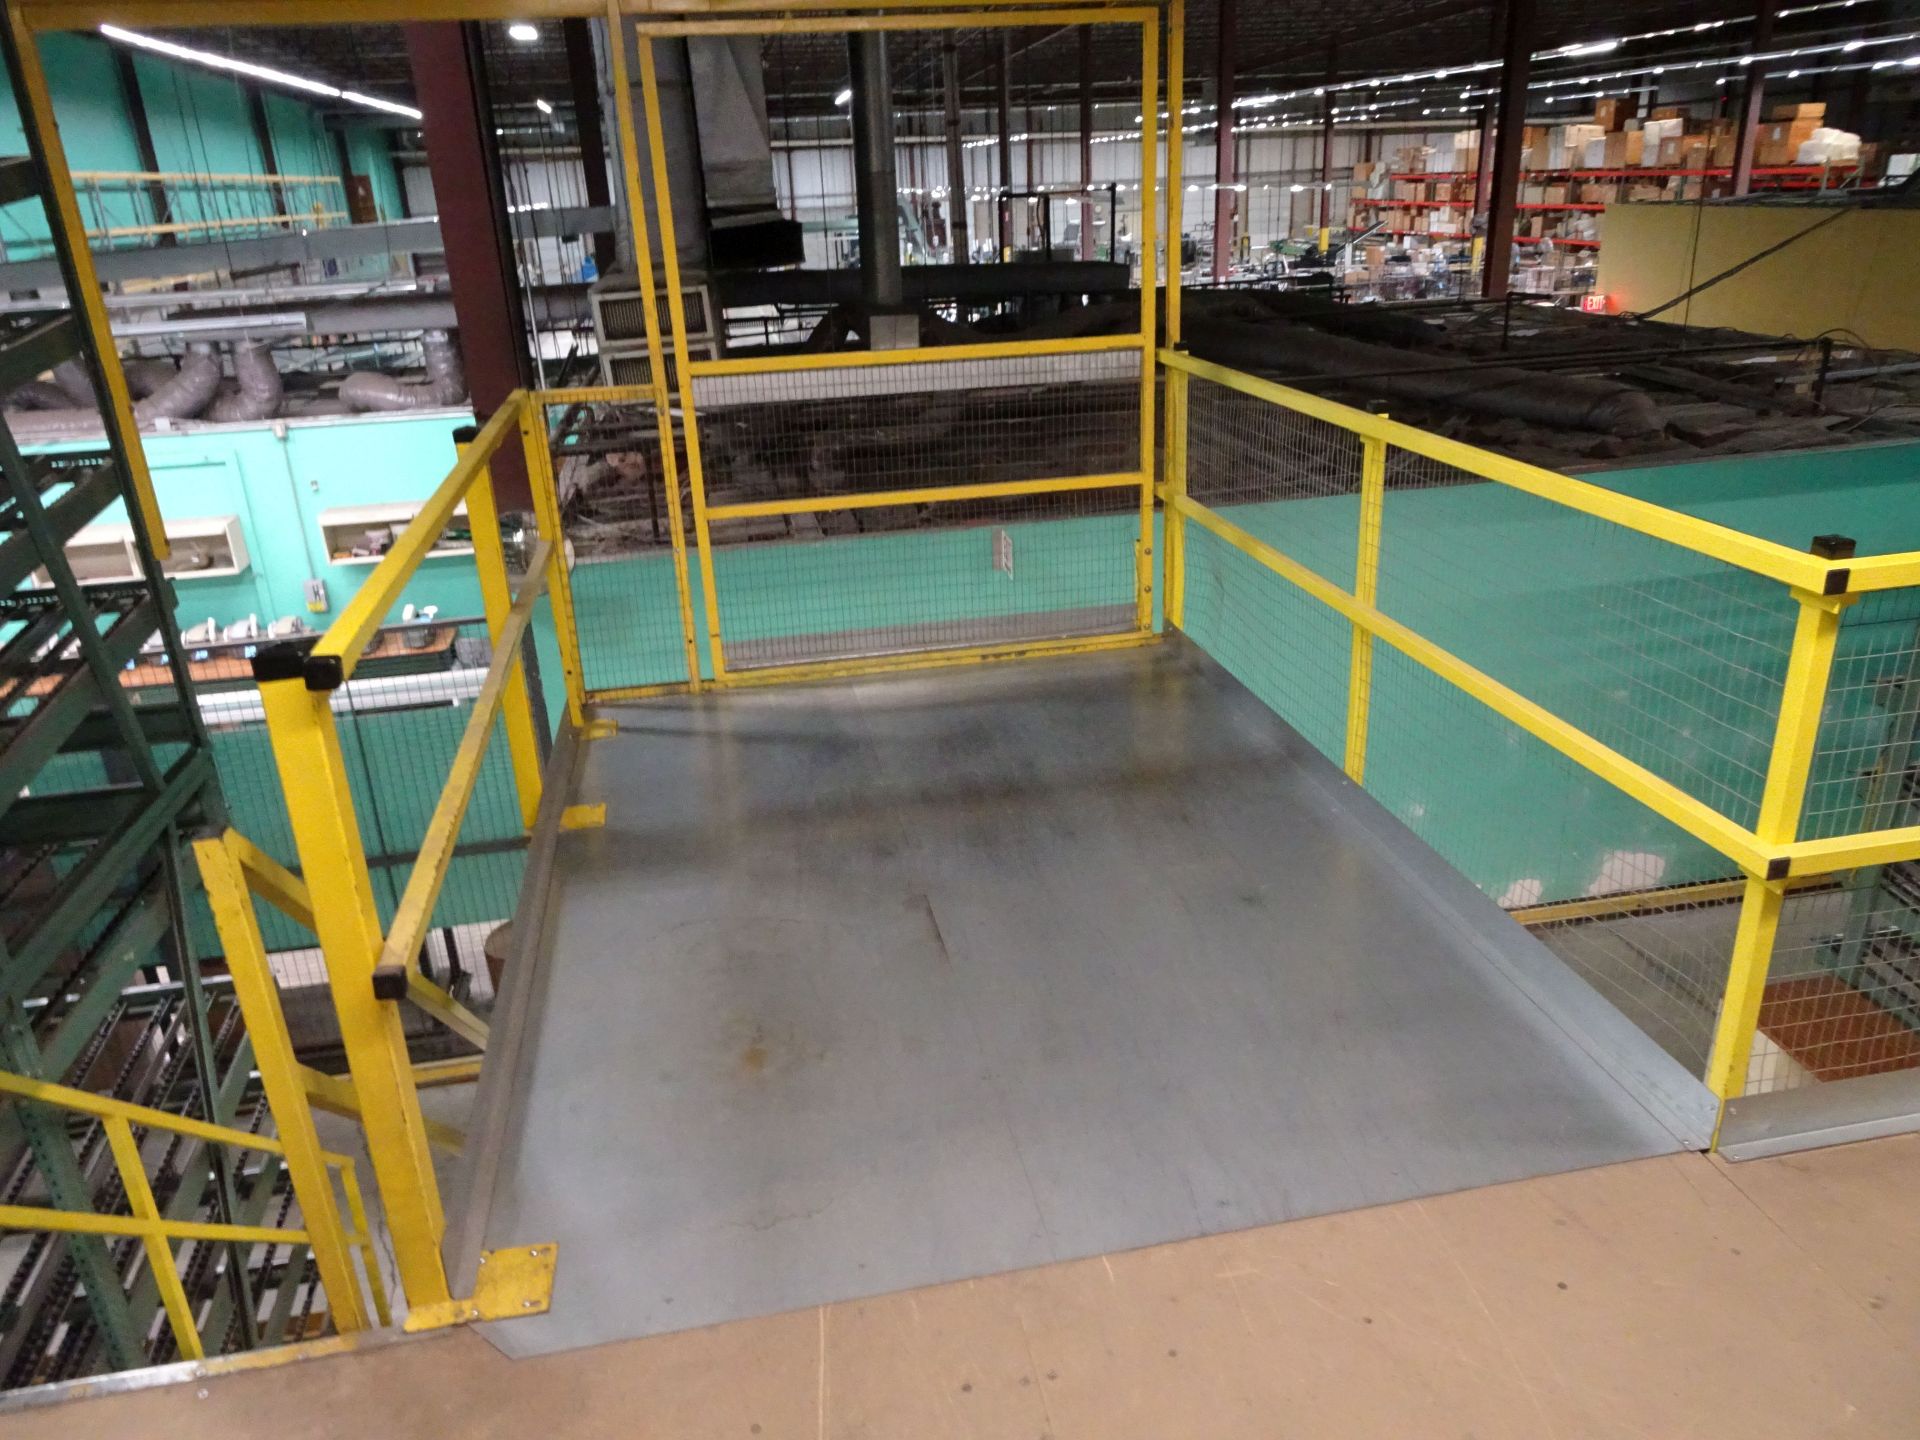 25' WIDE X 235' LONG TWO-STORY SPACE LOFT MEZZANINE WITH (24) SECTIONS 60" WIDE X 128" DEEP X 19' - Image 6 of 10